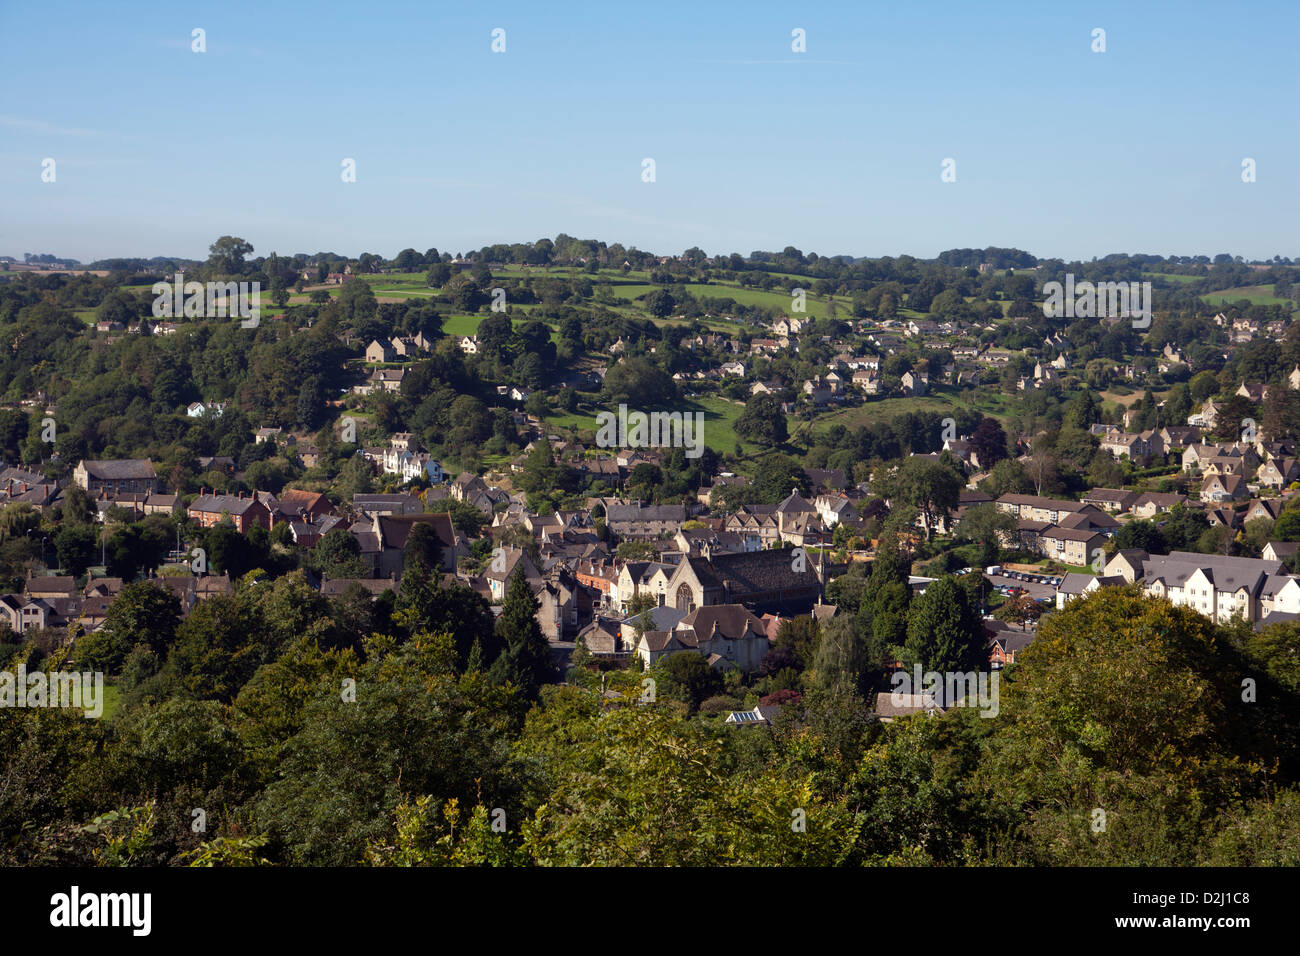 The view over Nailsworth town nestled in its valley on the edge of the Cotswolds, Gloucestershire, UK Stock Photo